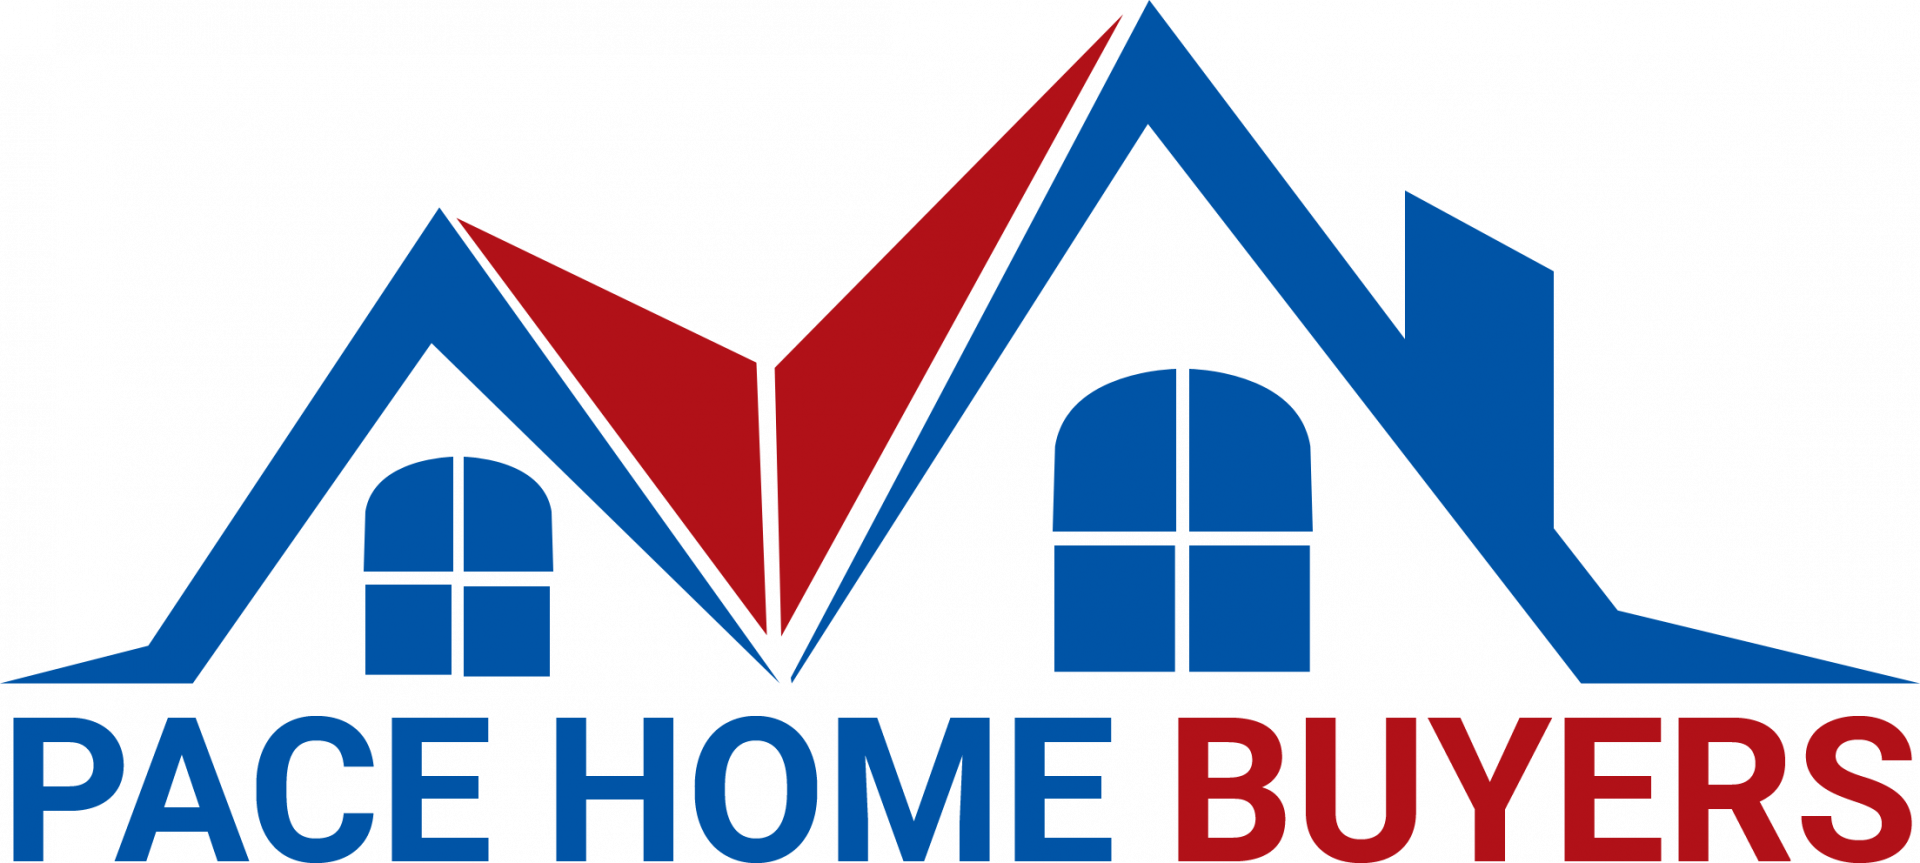 Pace Home Buyers  logo